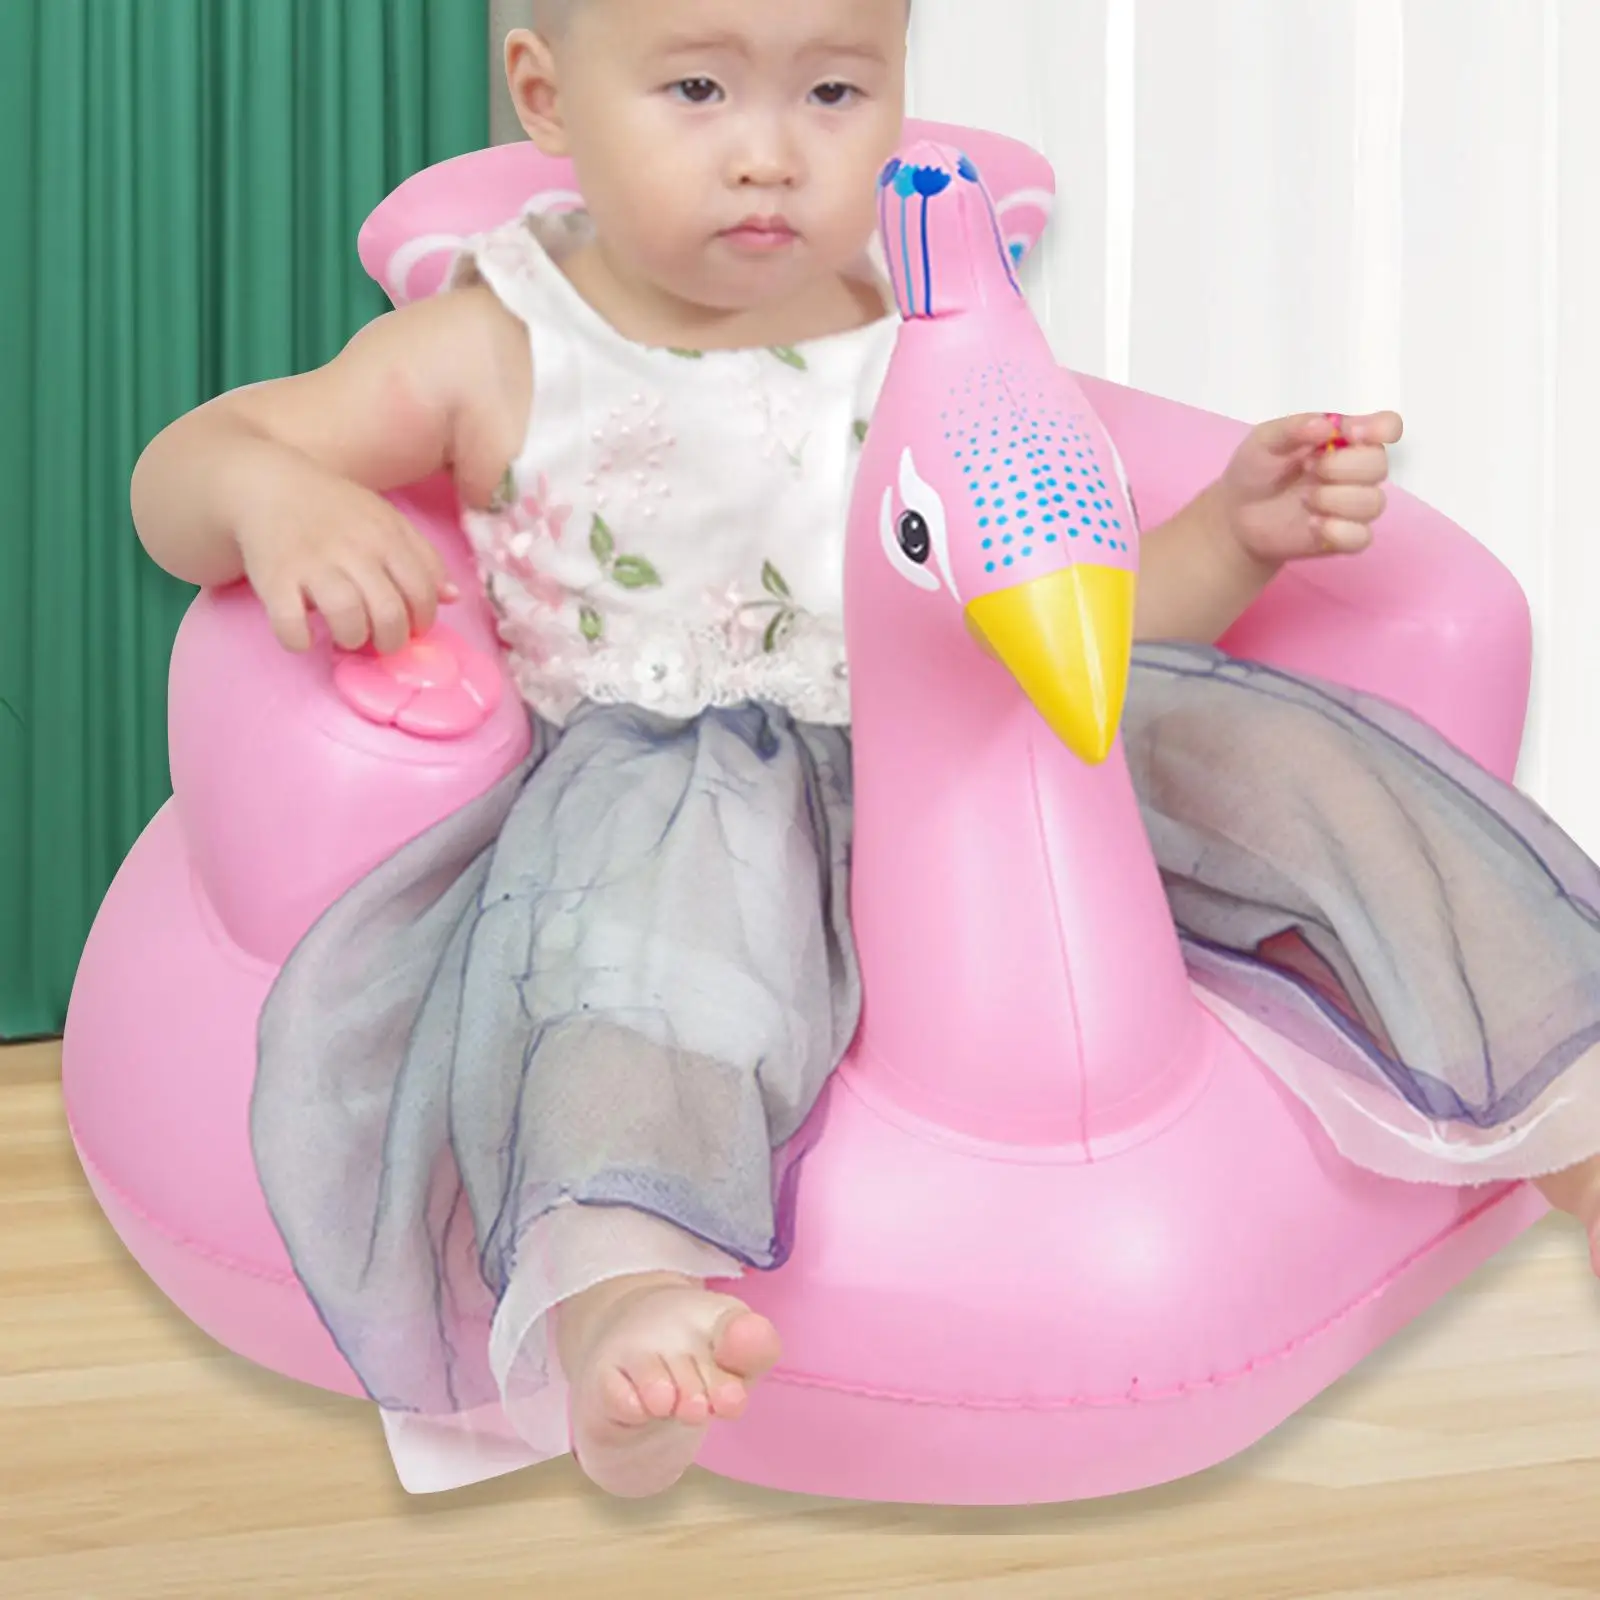 Baby Inflatable Seat Infant Back Support Sofa Floor Seat Playing Game Toy Inflatable Baby Seat for Sitting up Baby Shower Chair